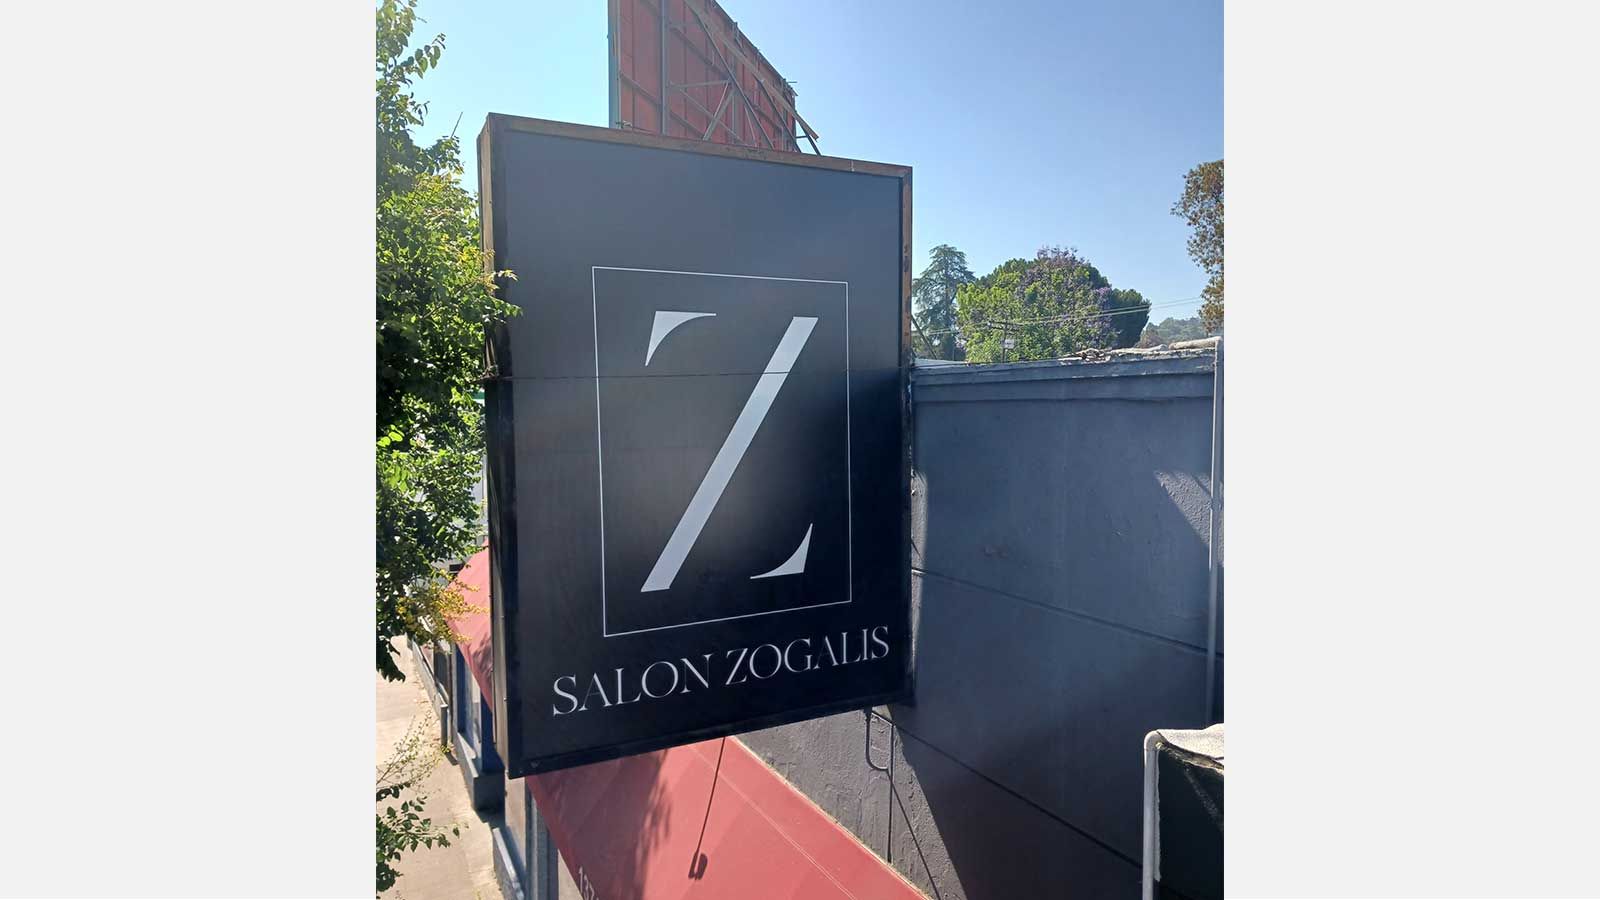 Salon Zogalis light box sign face replacement for outdoors